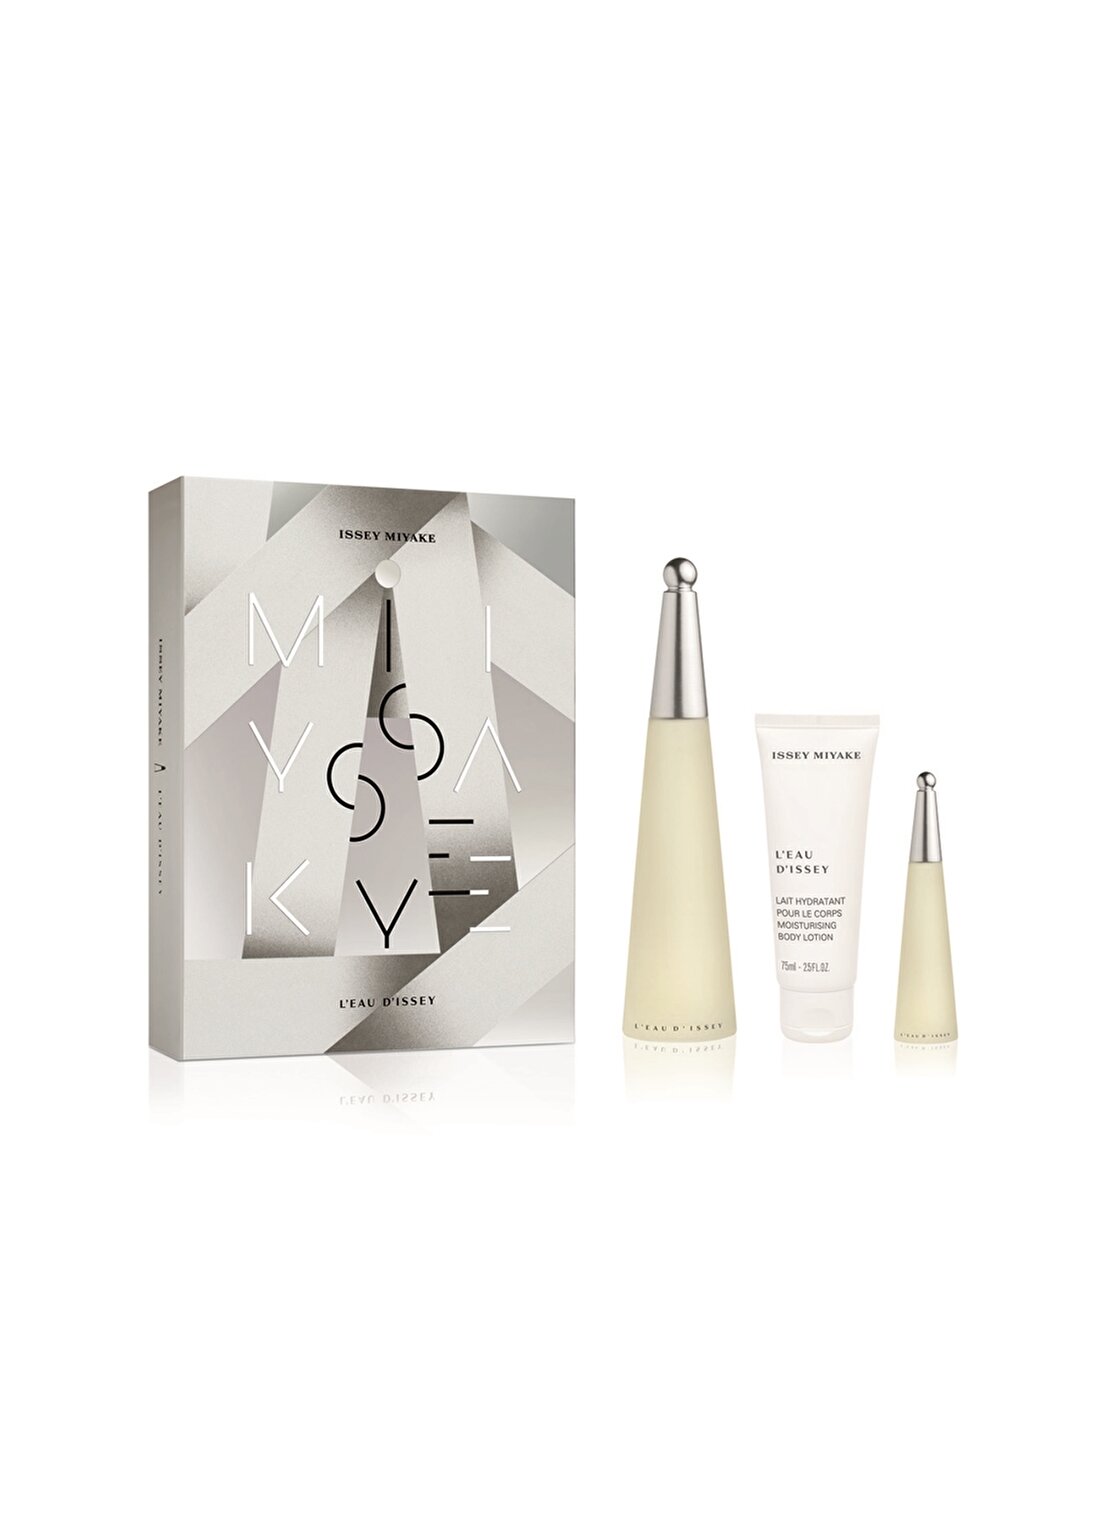 İssey Miyake L'eau D'issey Edt 100 Ml + Body Lotion 75 Ml + L'eau D'issey Edt 10 Ml Parfüm Set